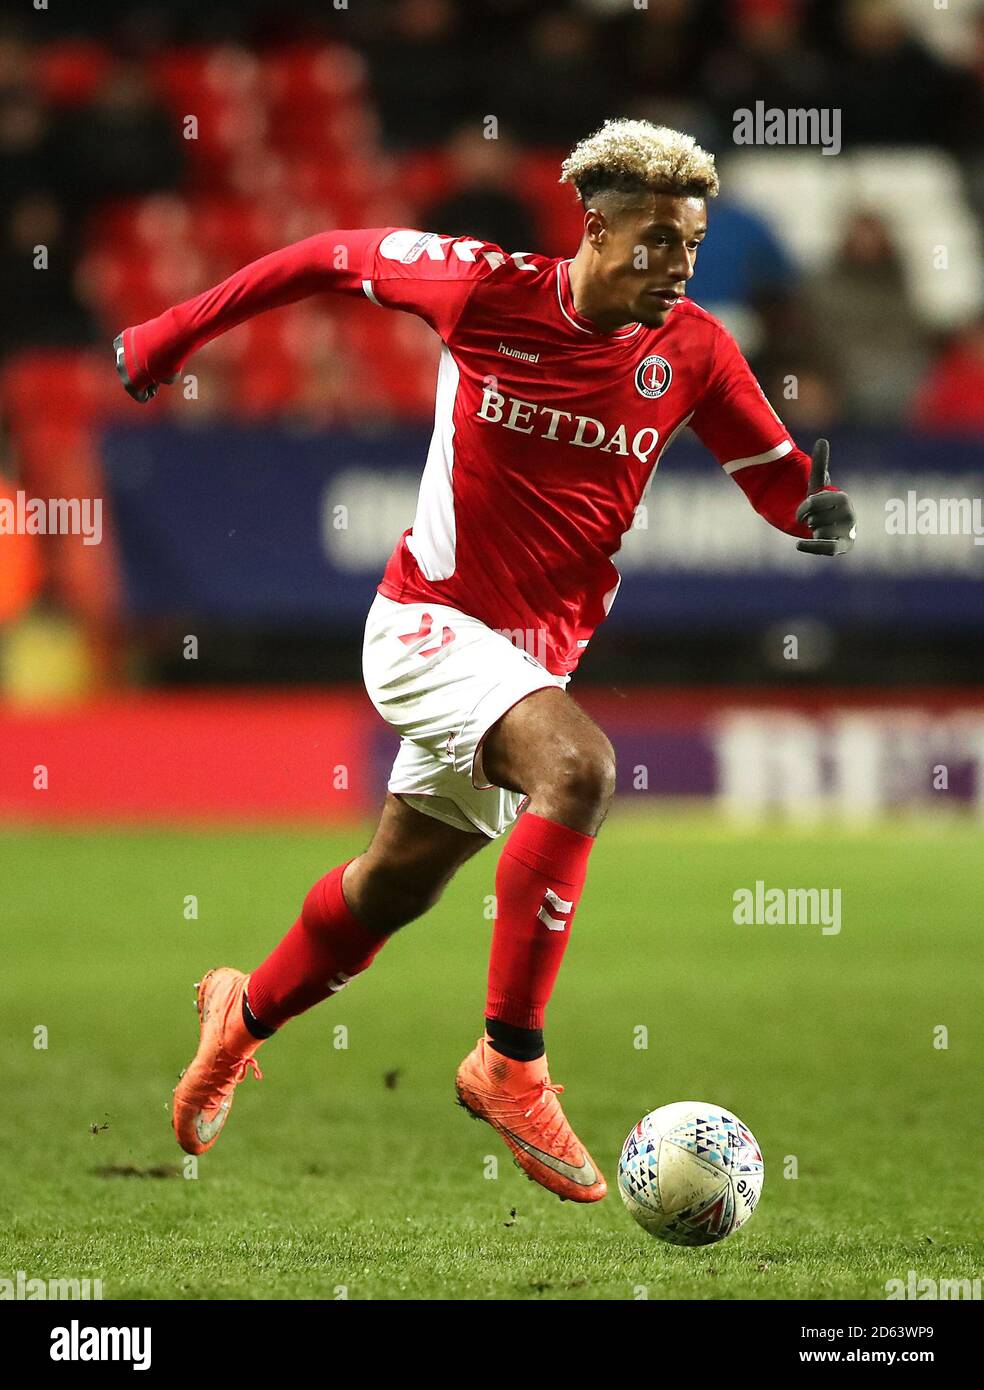 Charlton Athletic's Lyle Taylor in action Stock Photo